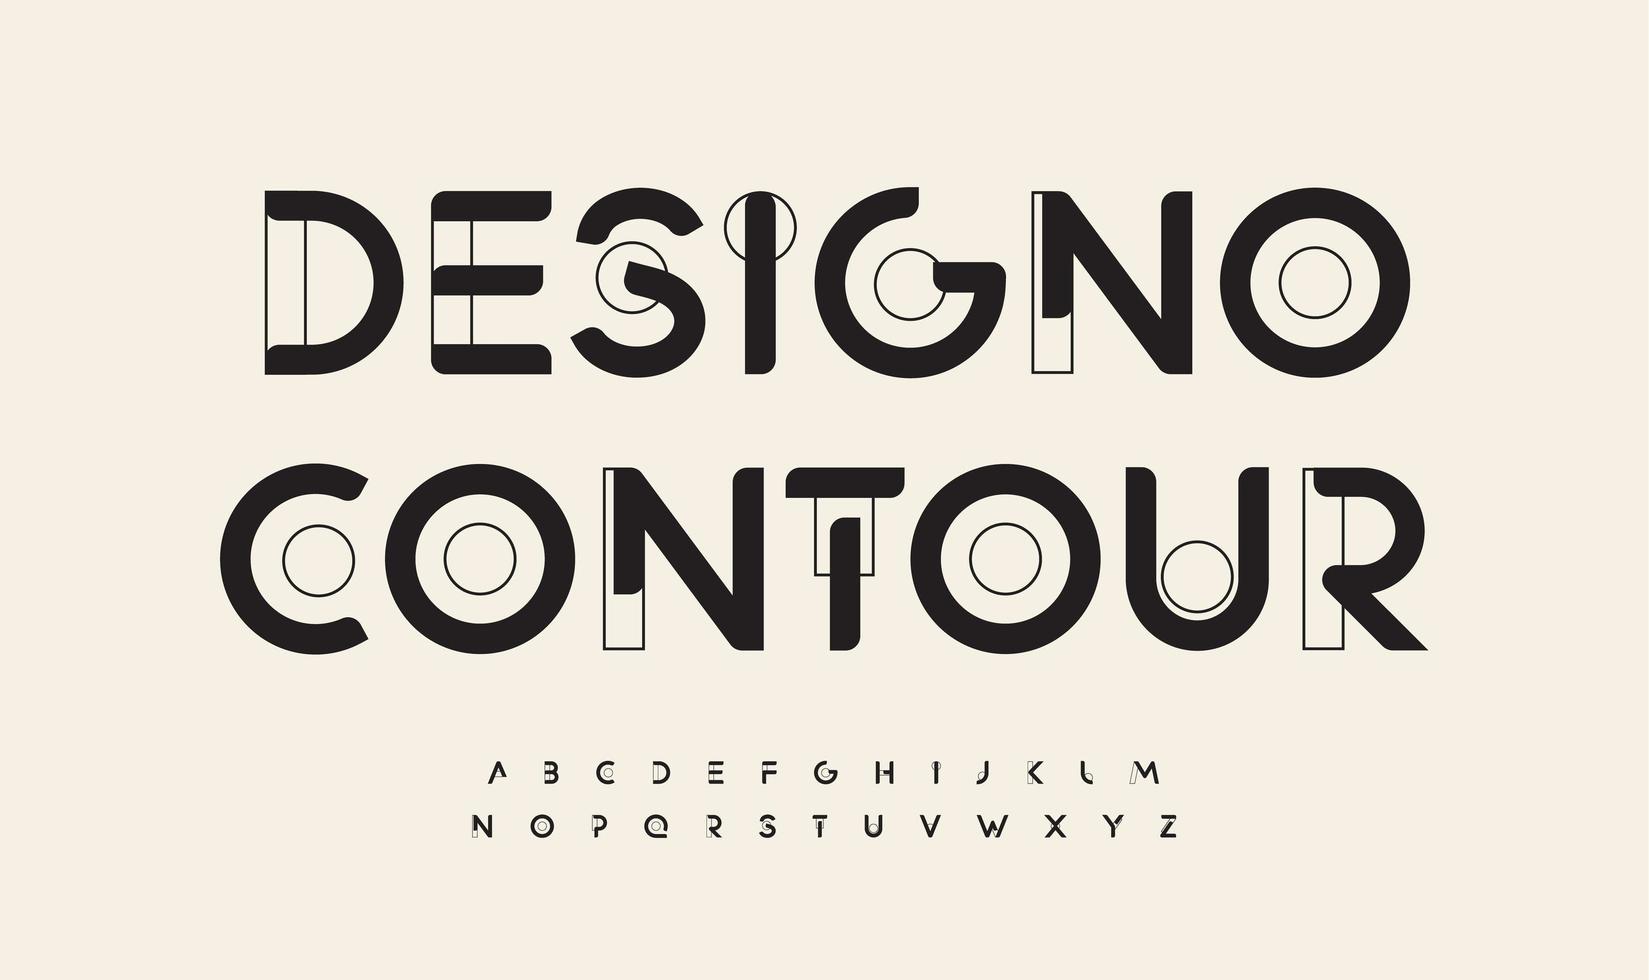 Geometric drawn font cutting edge letters outline art contour alphabet. Minimalistic futuristic typographic for modern architecture logo, abstract monogram, hud scifi text, techno space lettering vector